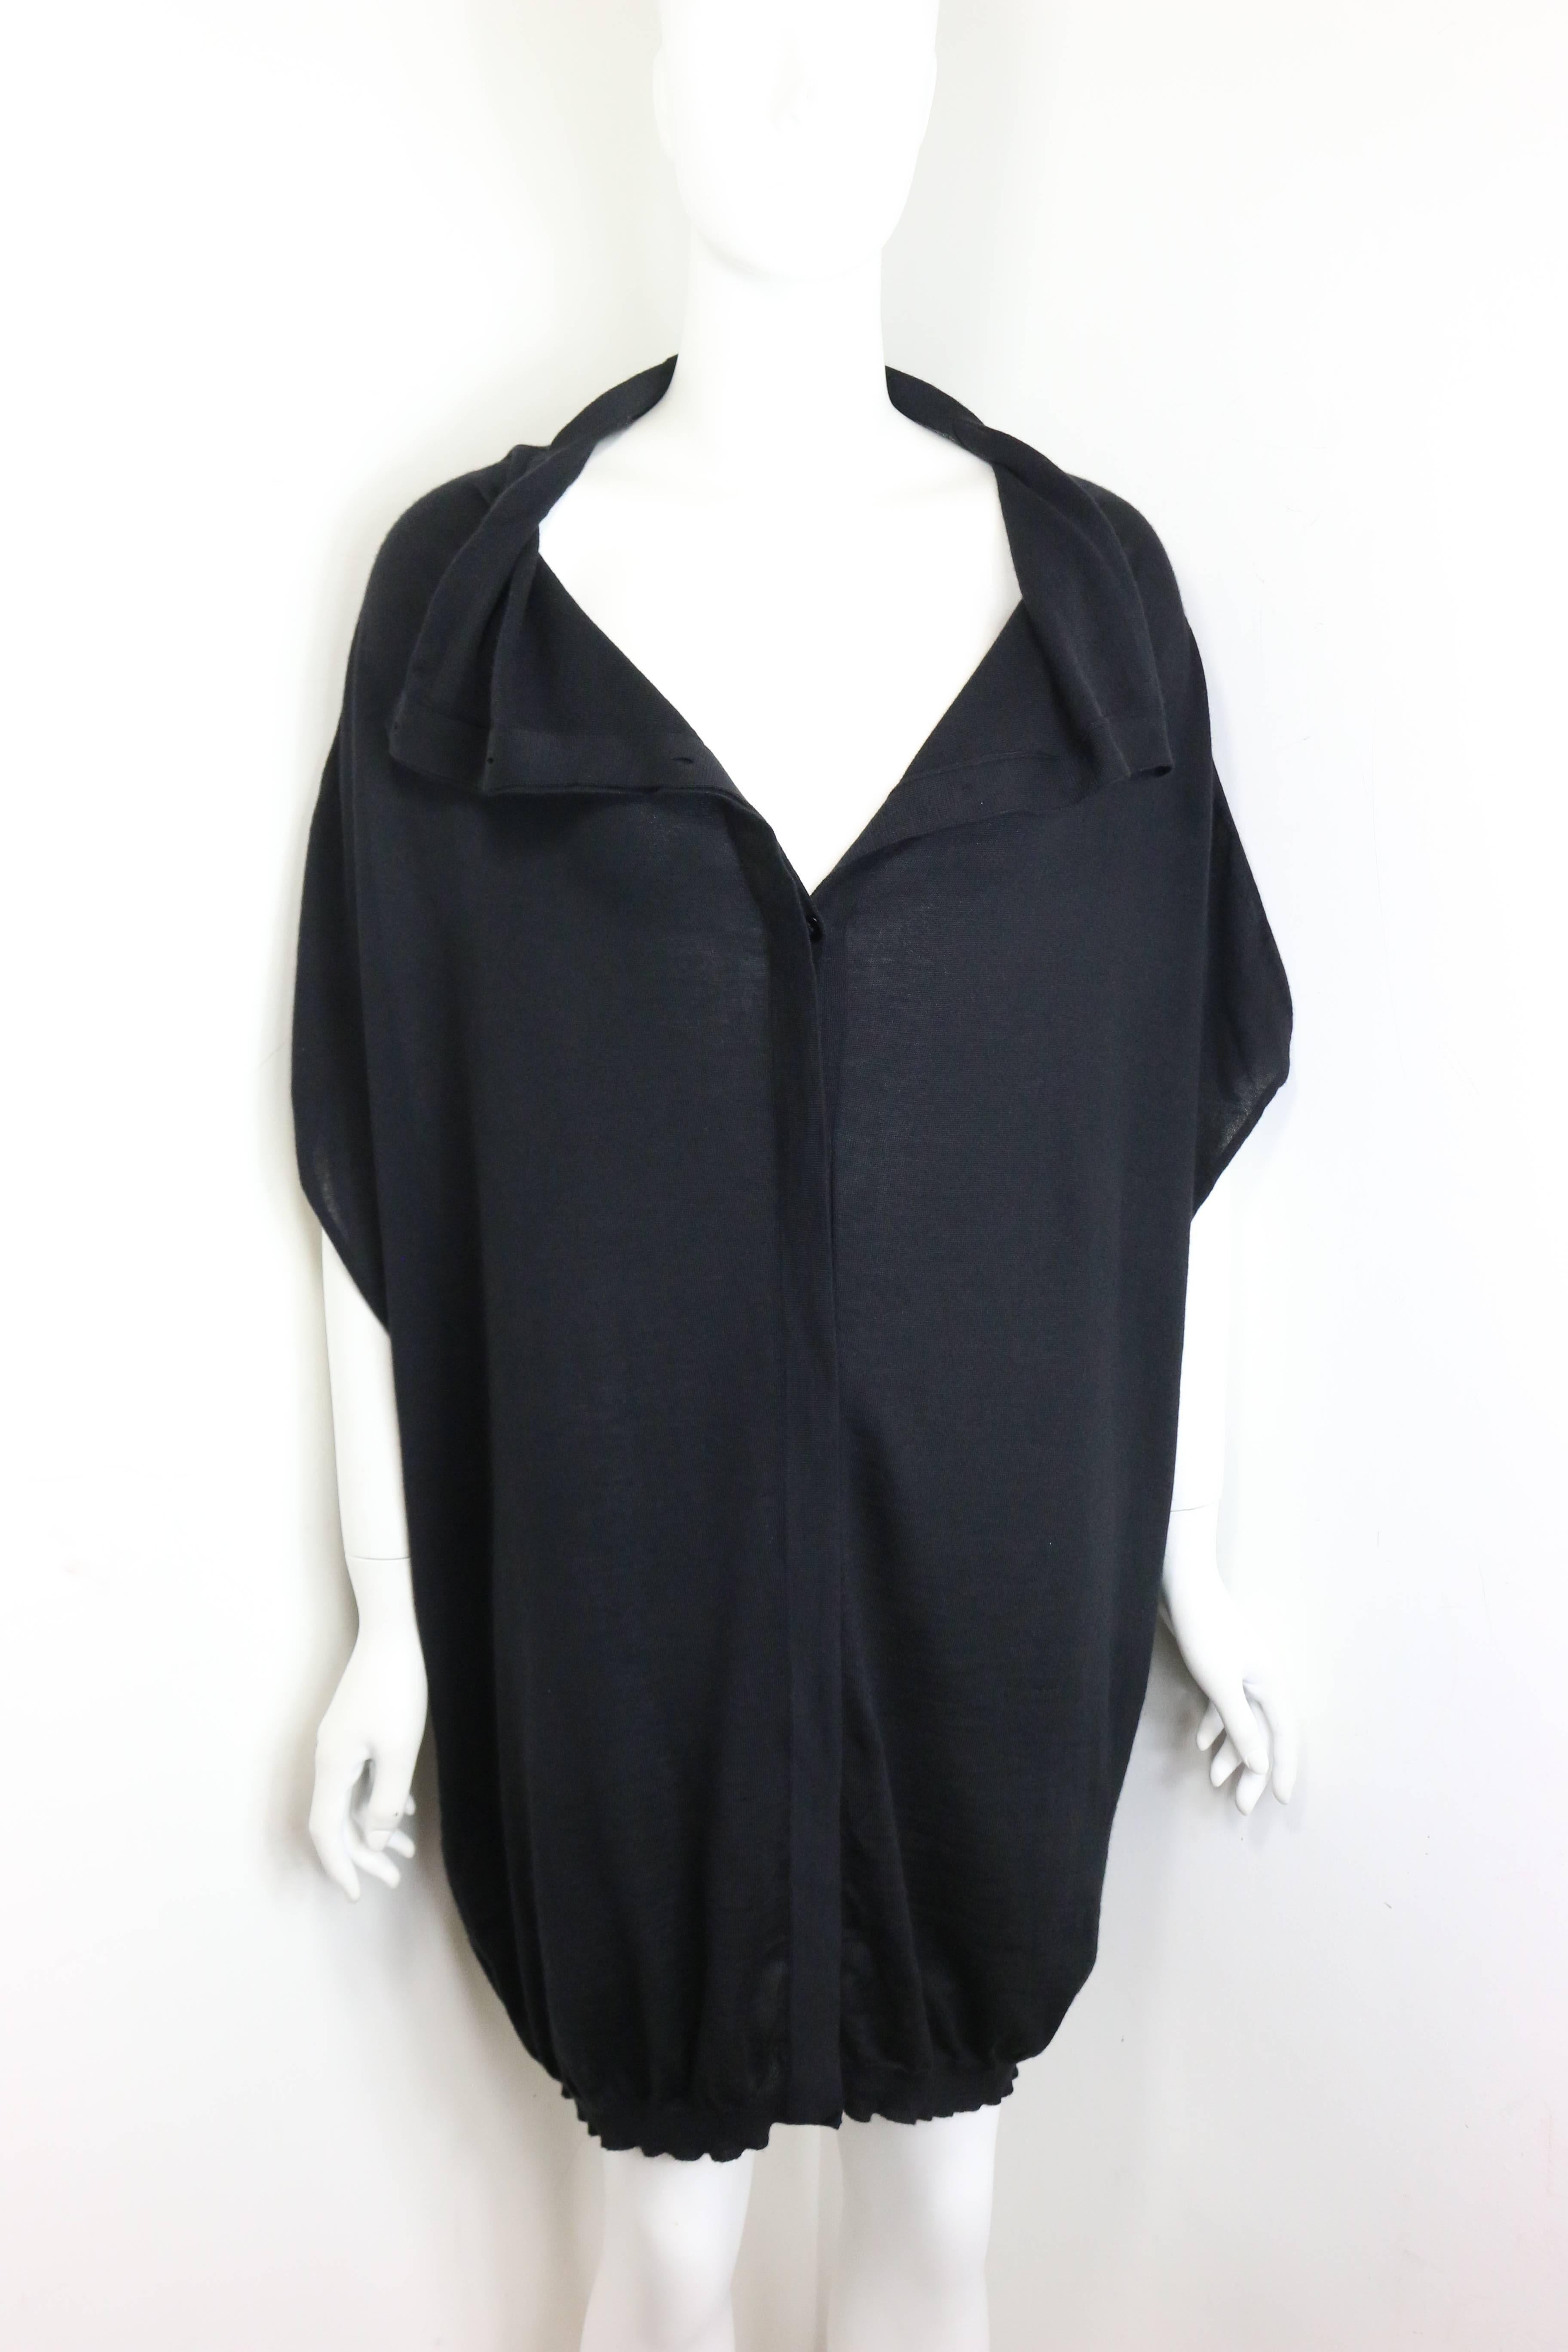 Jil Sander by Raf Simons Cashmere and Silk Sleeveless Oversize Top In Excellent Condition For Sale In Sheung Wan, HK